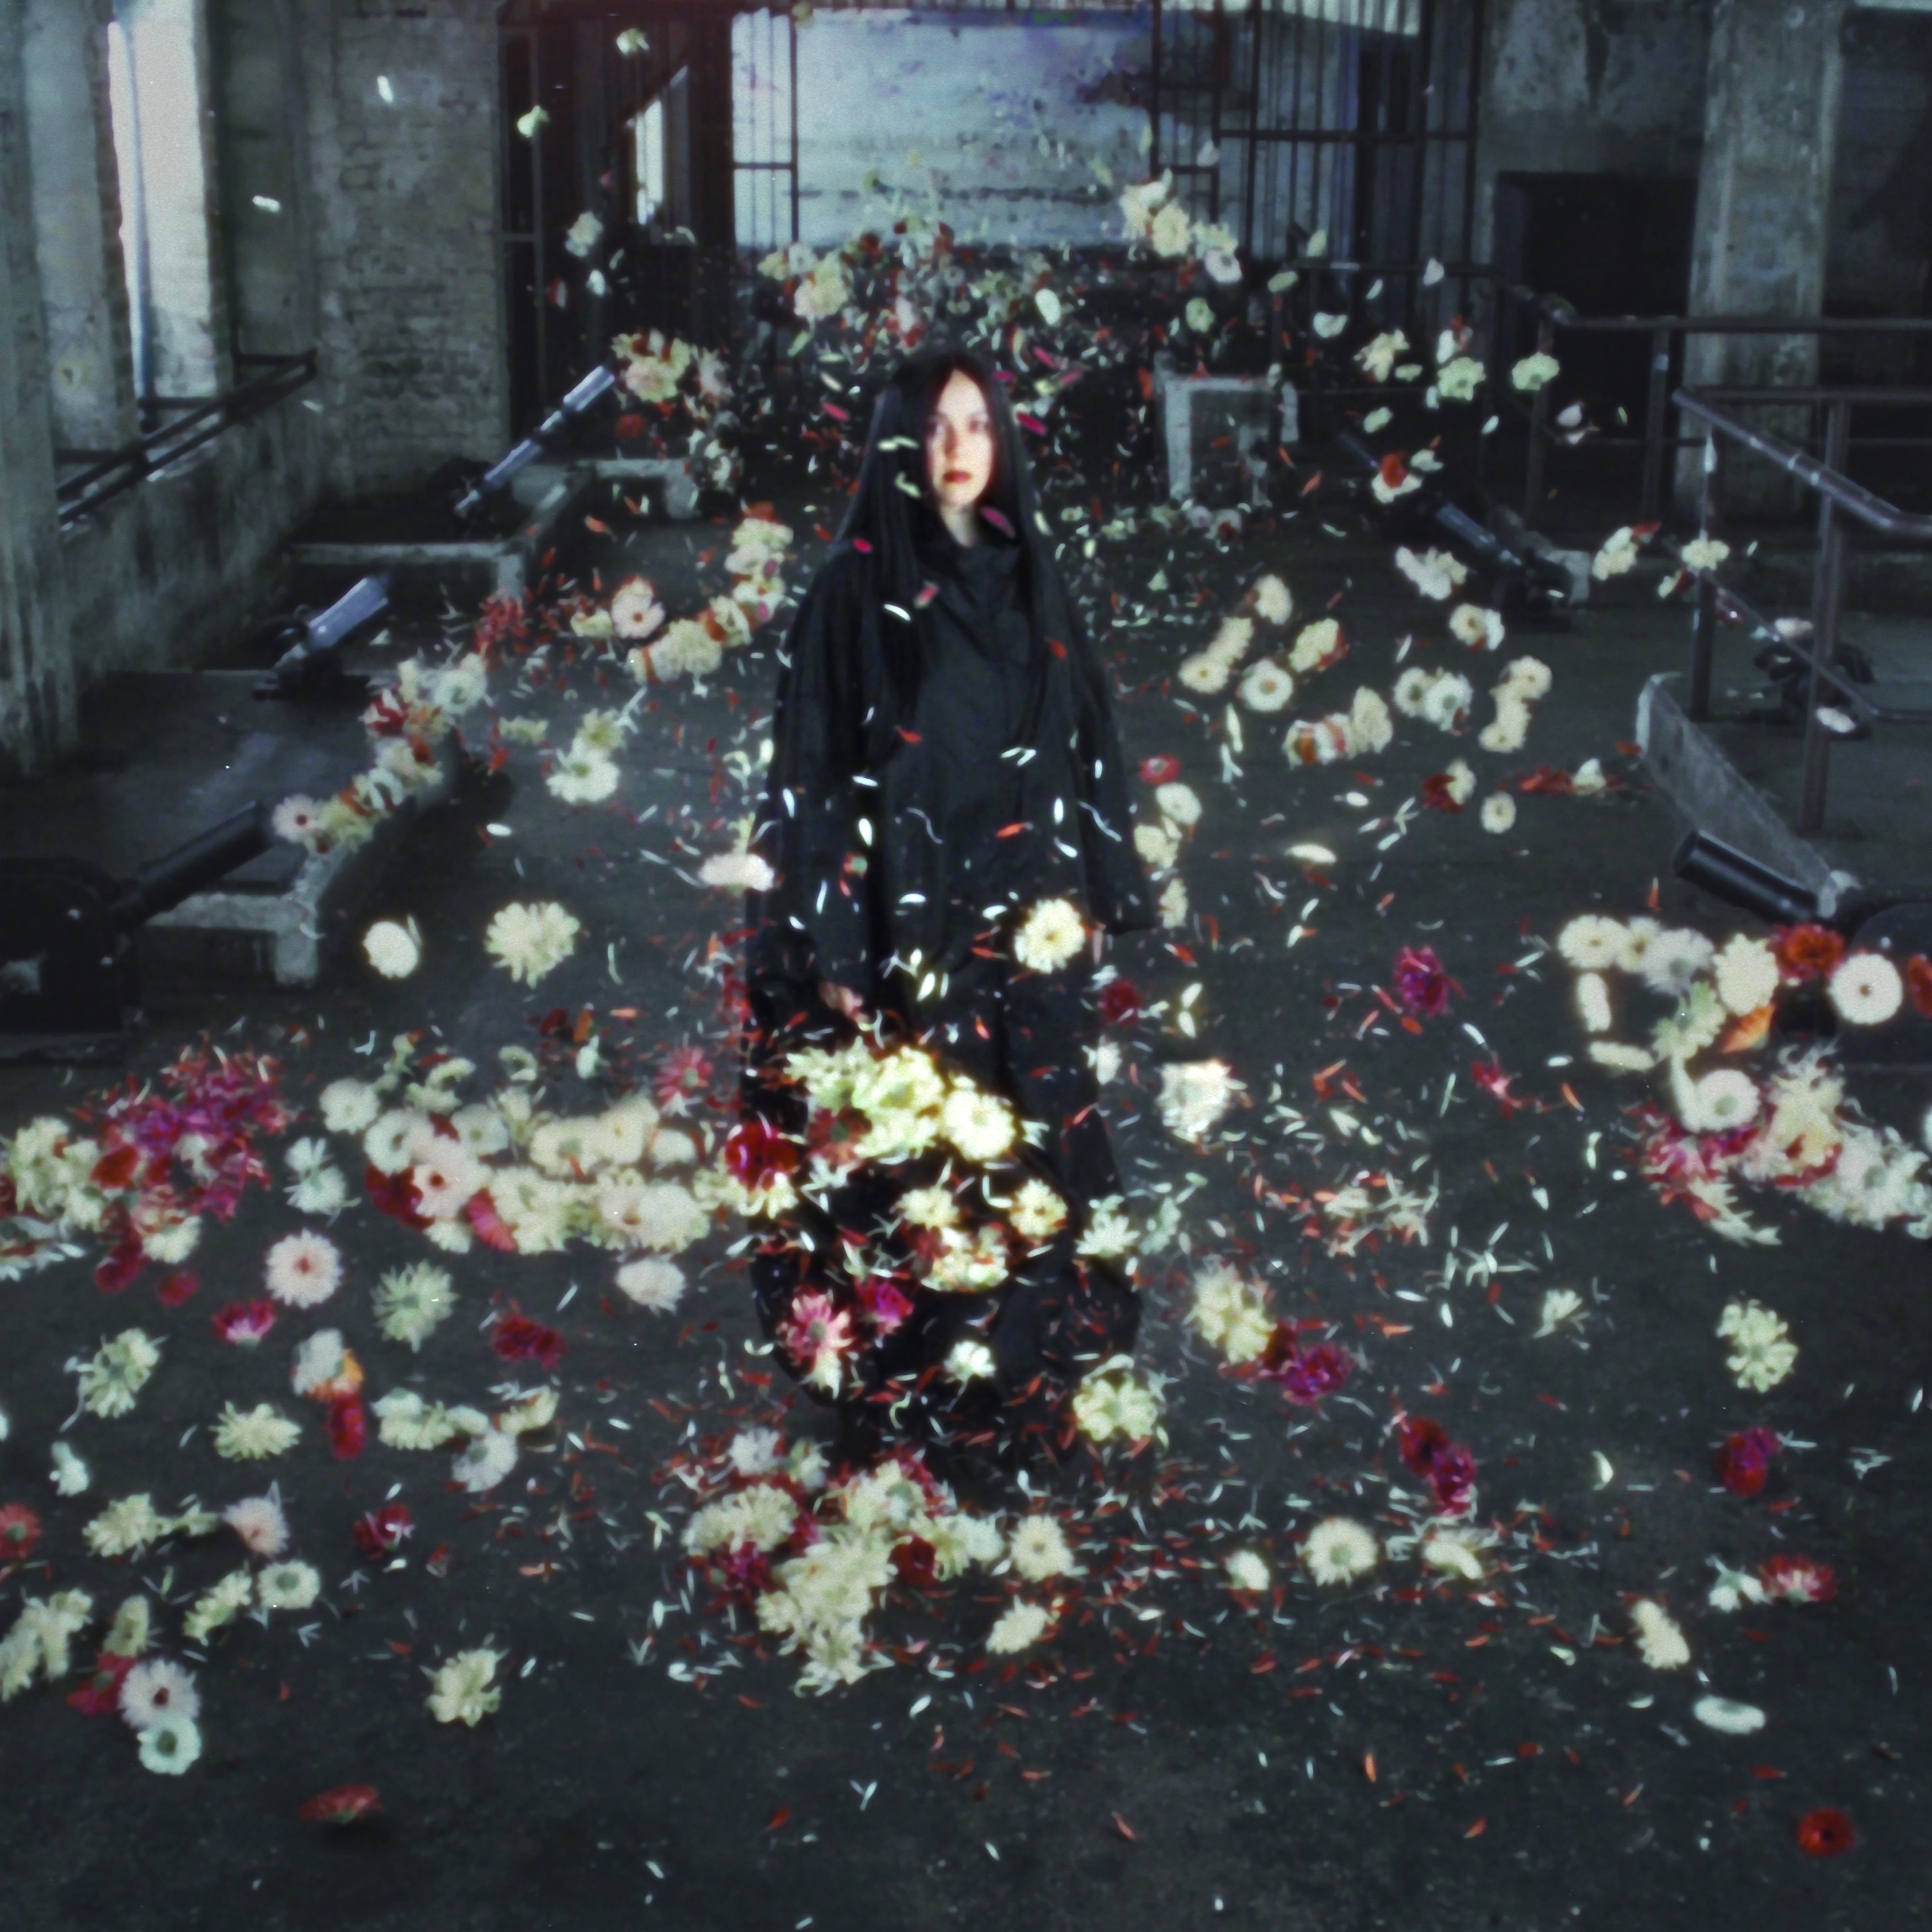 Woman stands in dark robe inside a stone mausoleum surrounded by an explosion of white daisies and petals